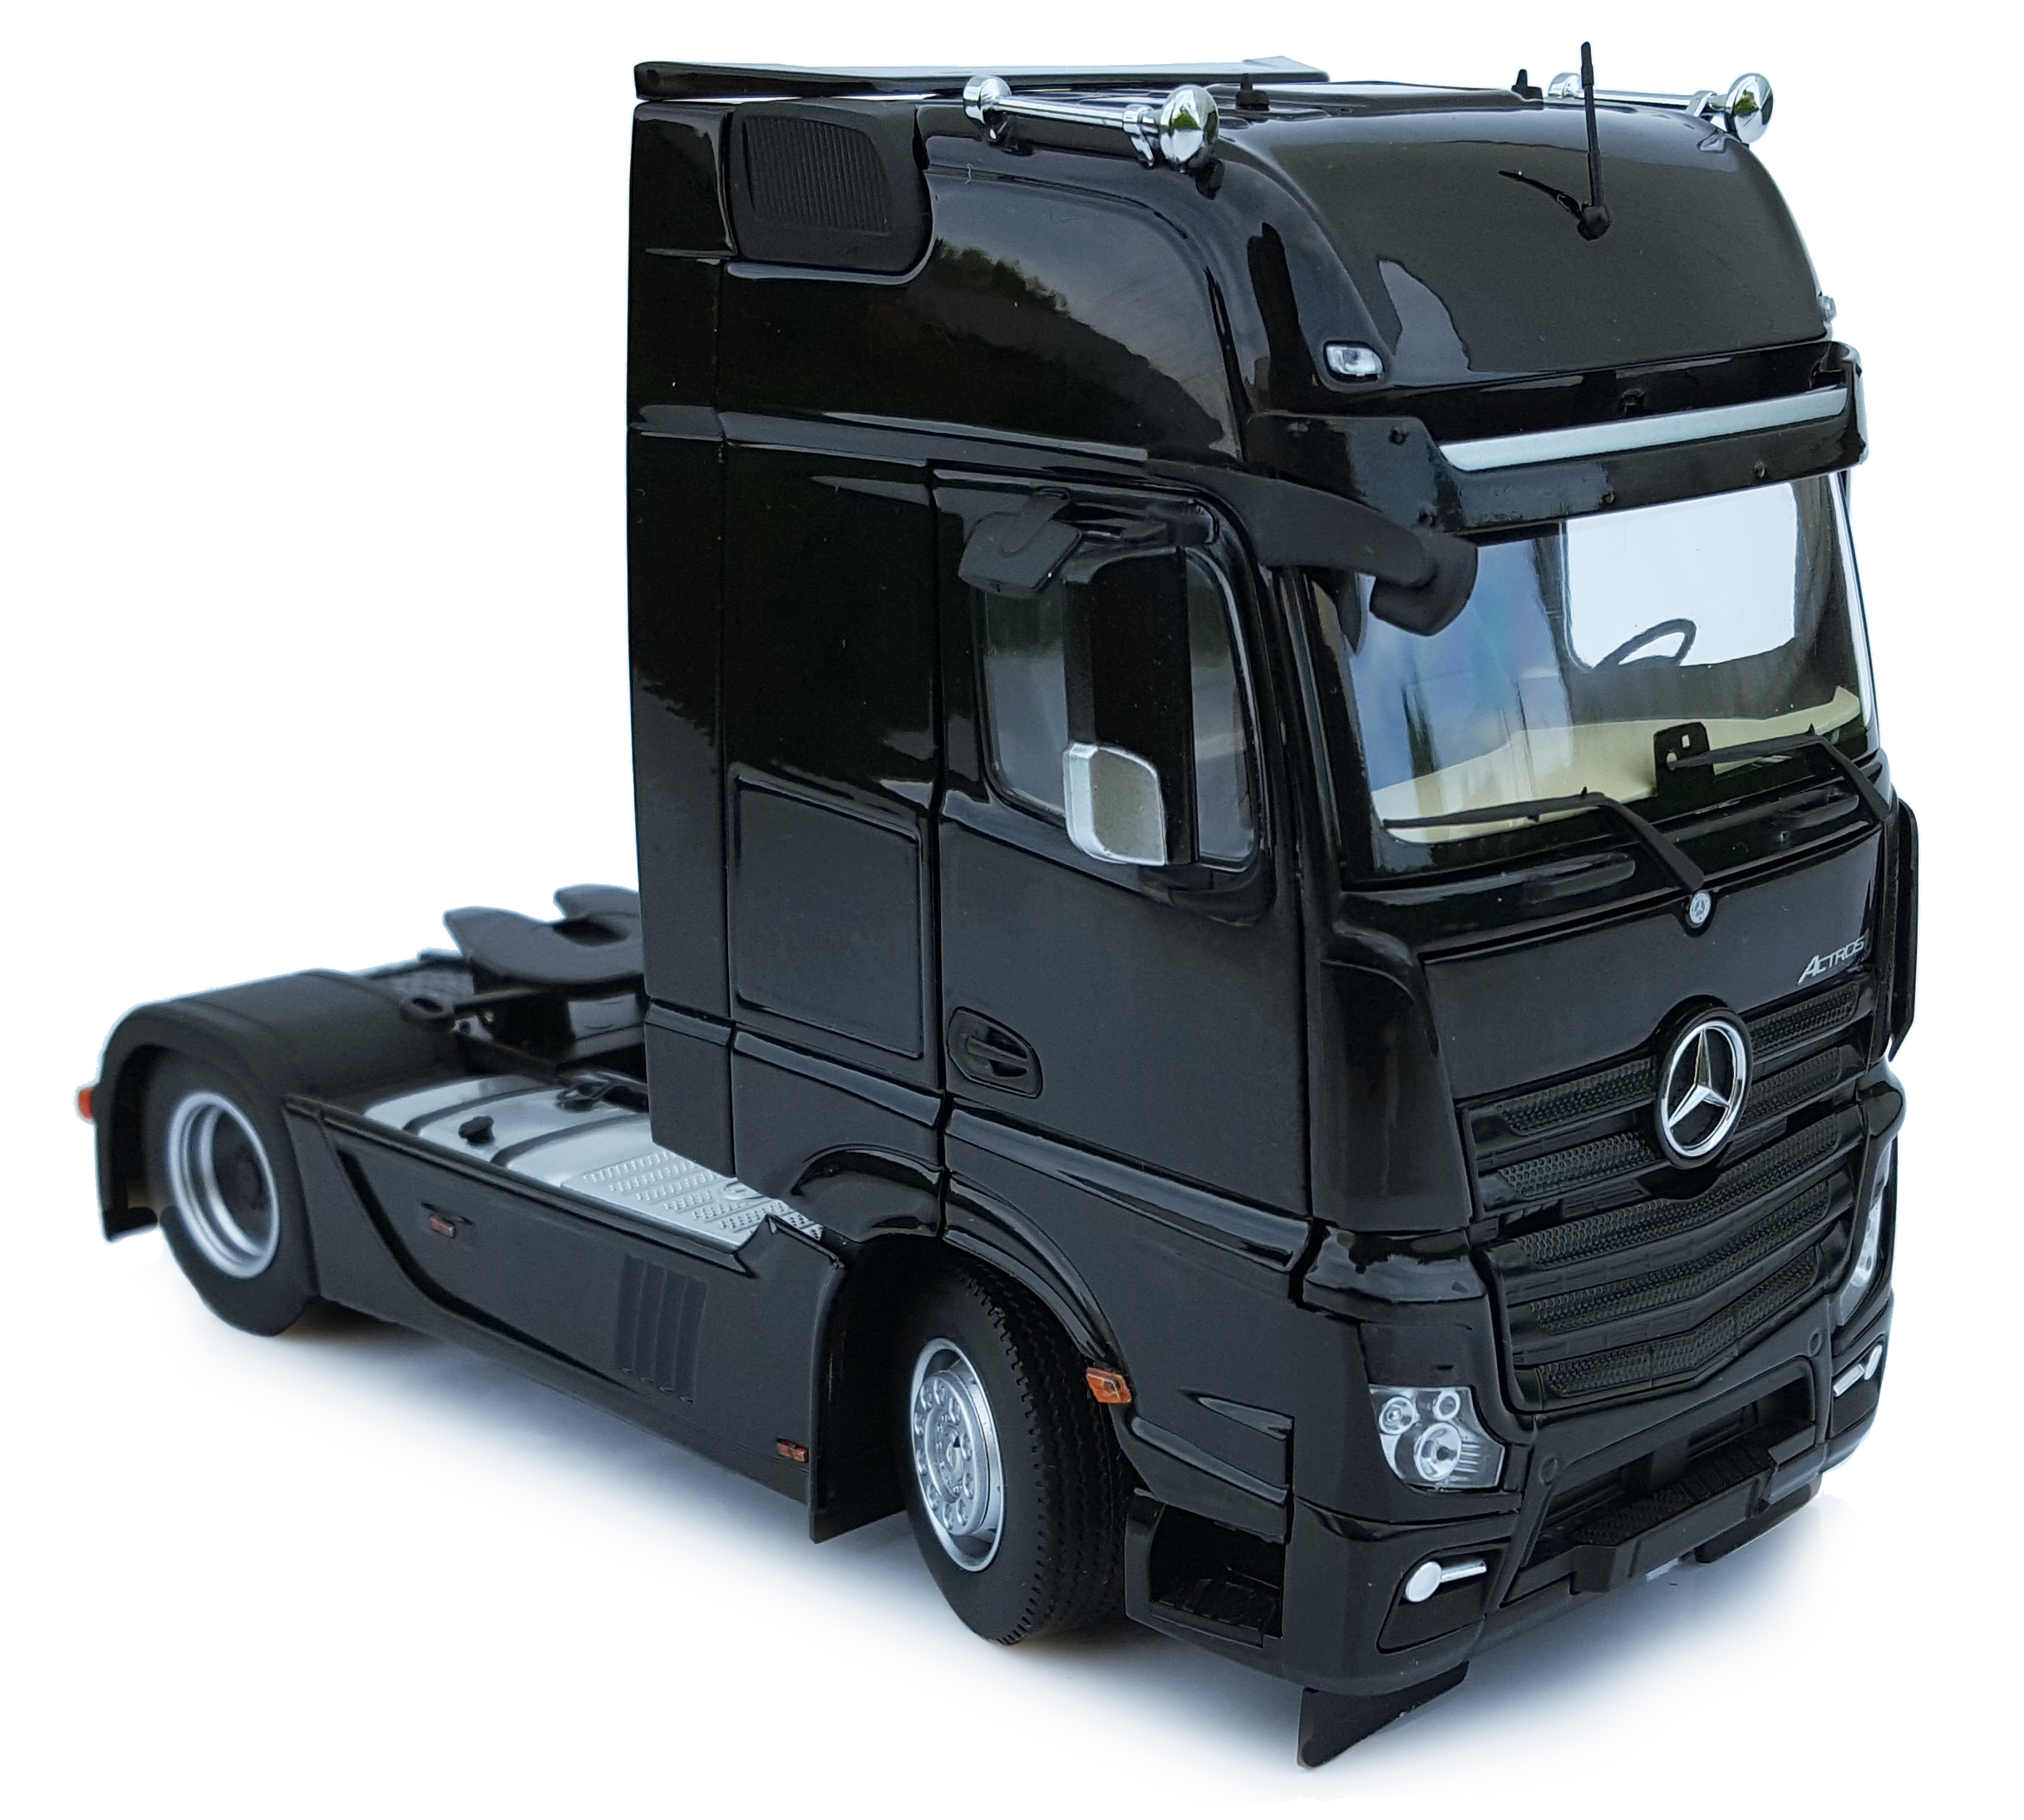 MARGE MODELS 1:32 SCALE MERCEDES-BENZ GIGASPACE TRACTOR UNIT TRUCK 6x2 BLACK